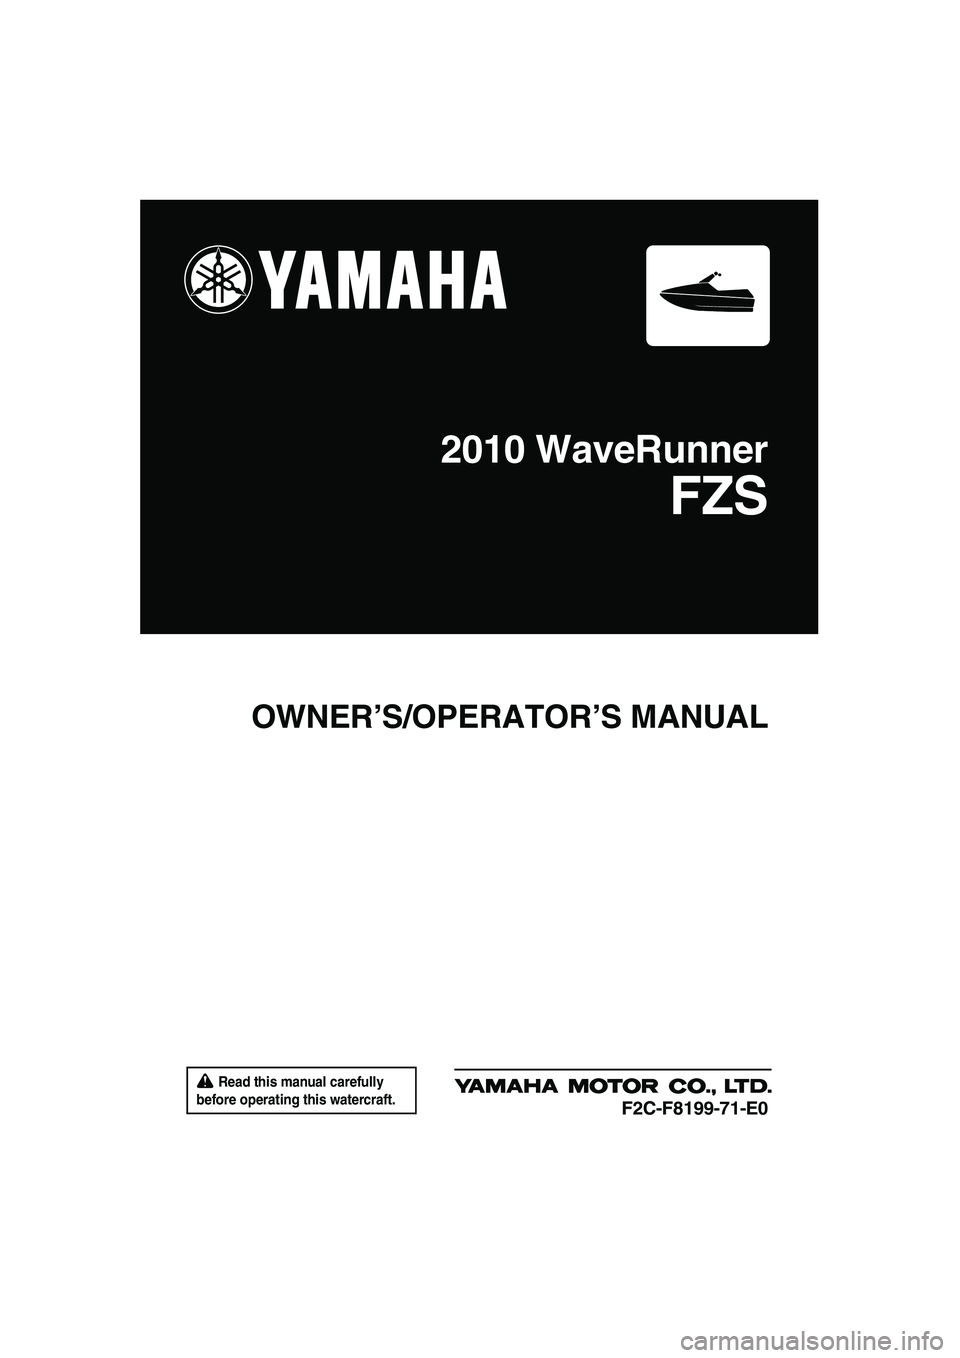 YAMAHA FZS 2010  Owners Manual  Read this manual carefully 
before operating this watercraft.
OWNER’S/OPERATOR’S MANUAL
2010 WaveRunner
FZS
F2C-F8199-71-E0
UF2C71E0.book  Page 1  Friday, July 10, 2009  1:31 PM 